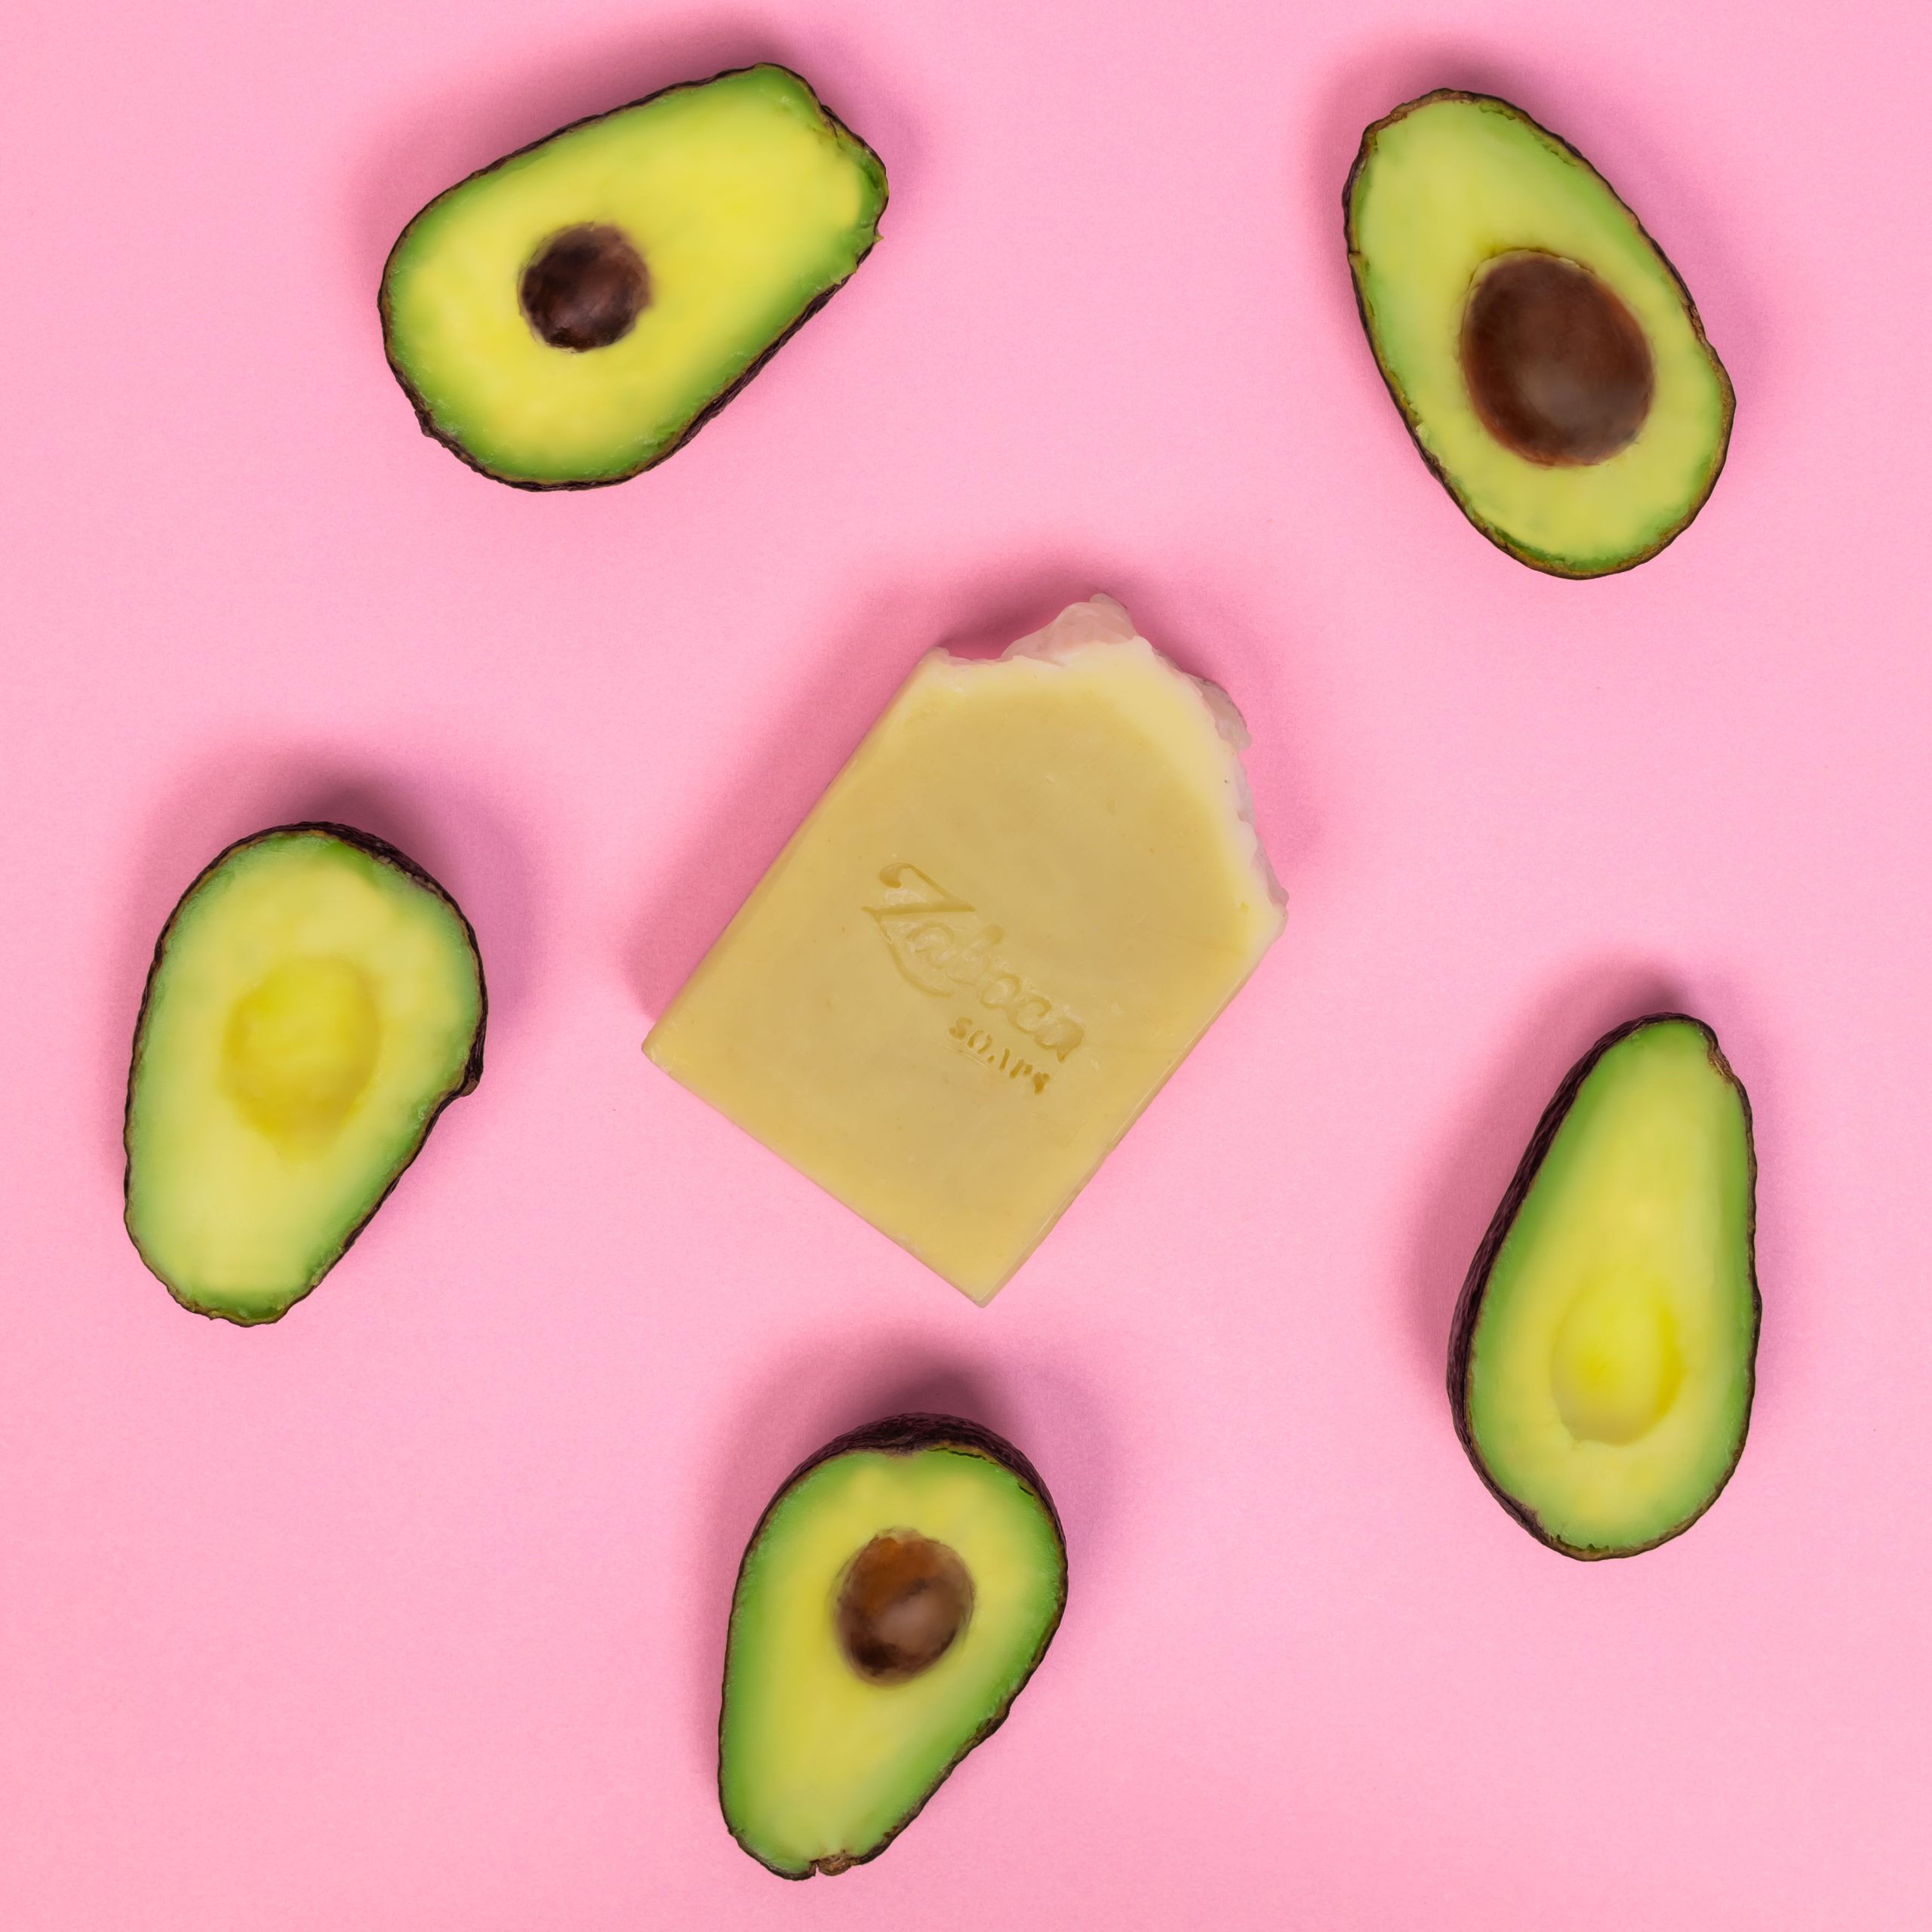 Avocado soap on pink background surrounded by sliced avocados.